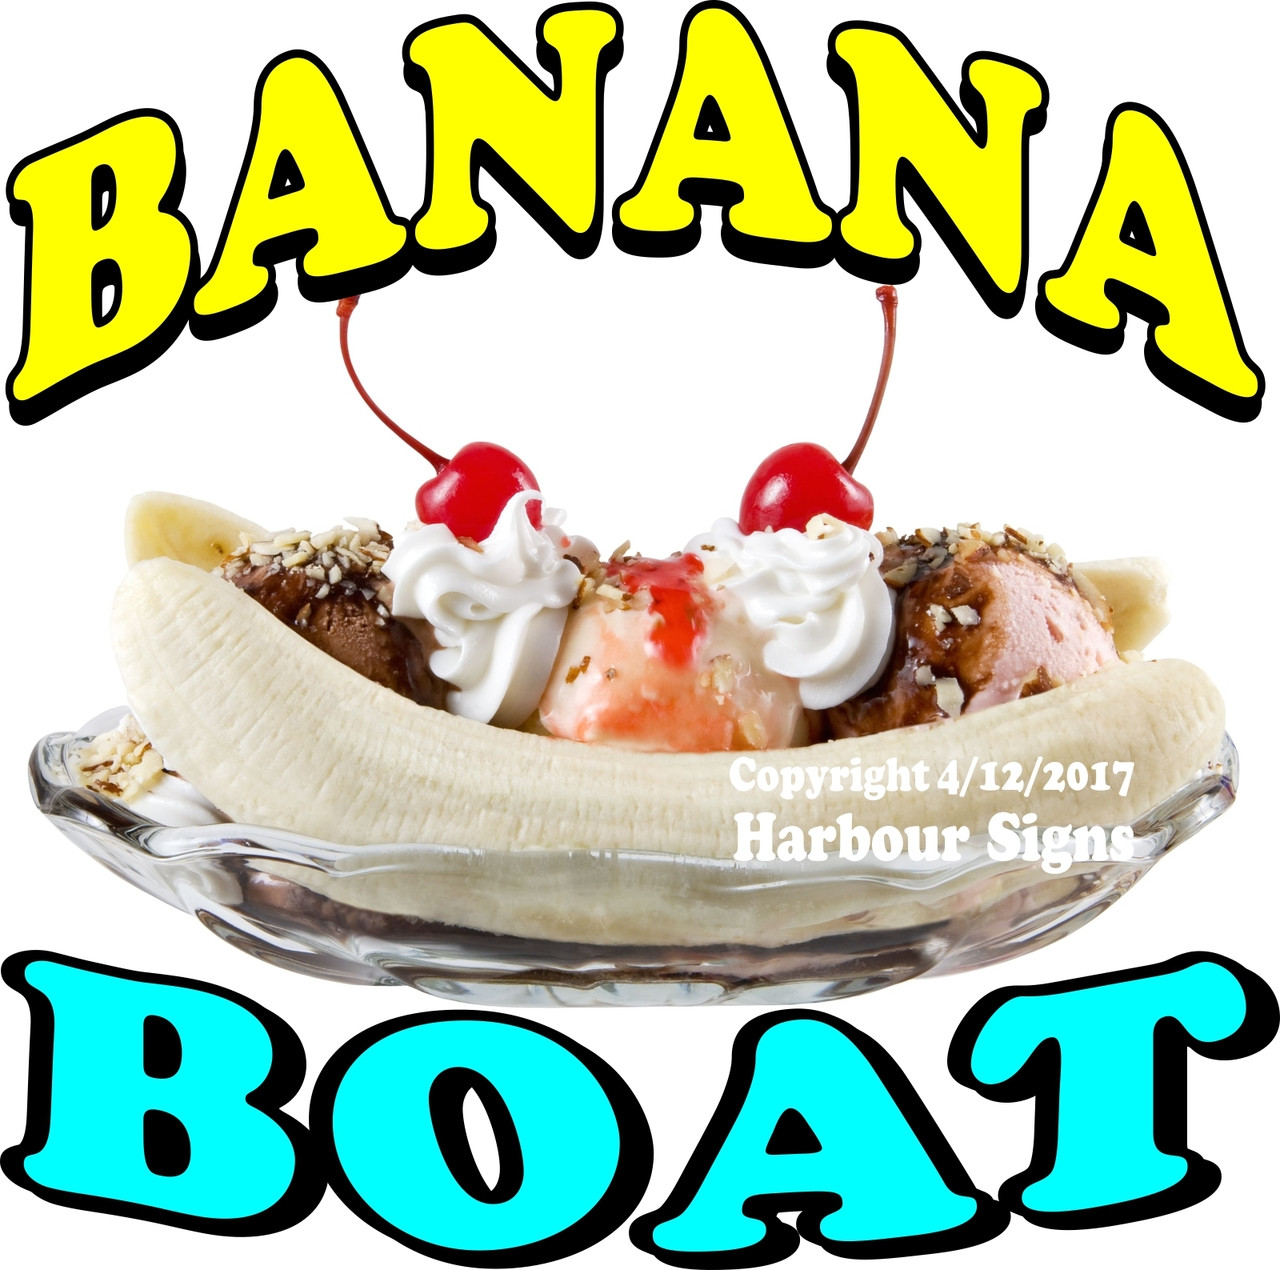 CHOOSE YOUR SIZE Banana Splits DECAL Concession Food Truck Vinyl Sticker 